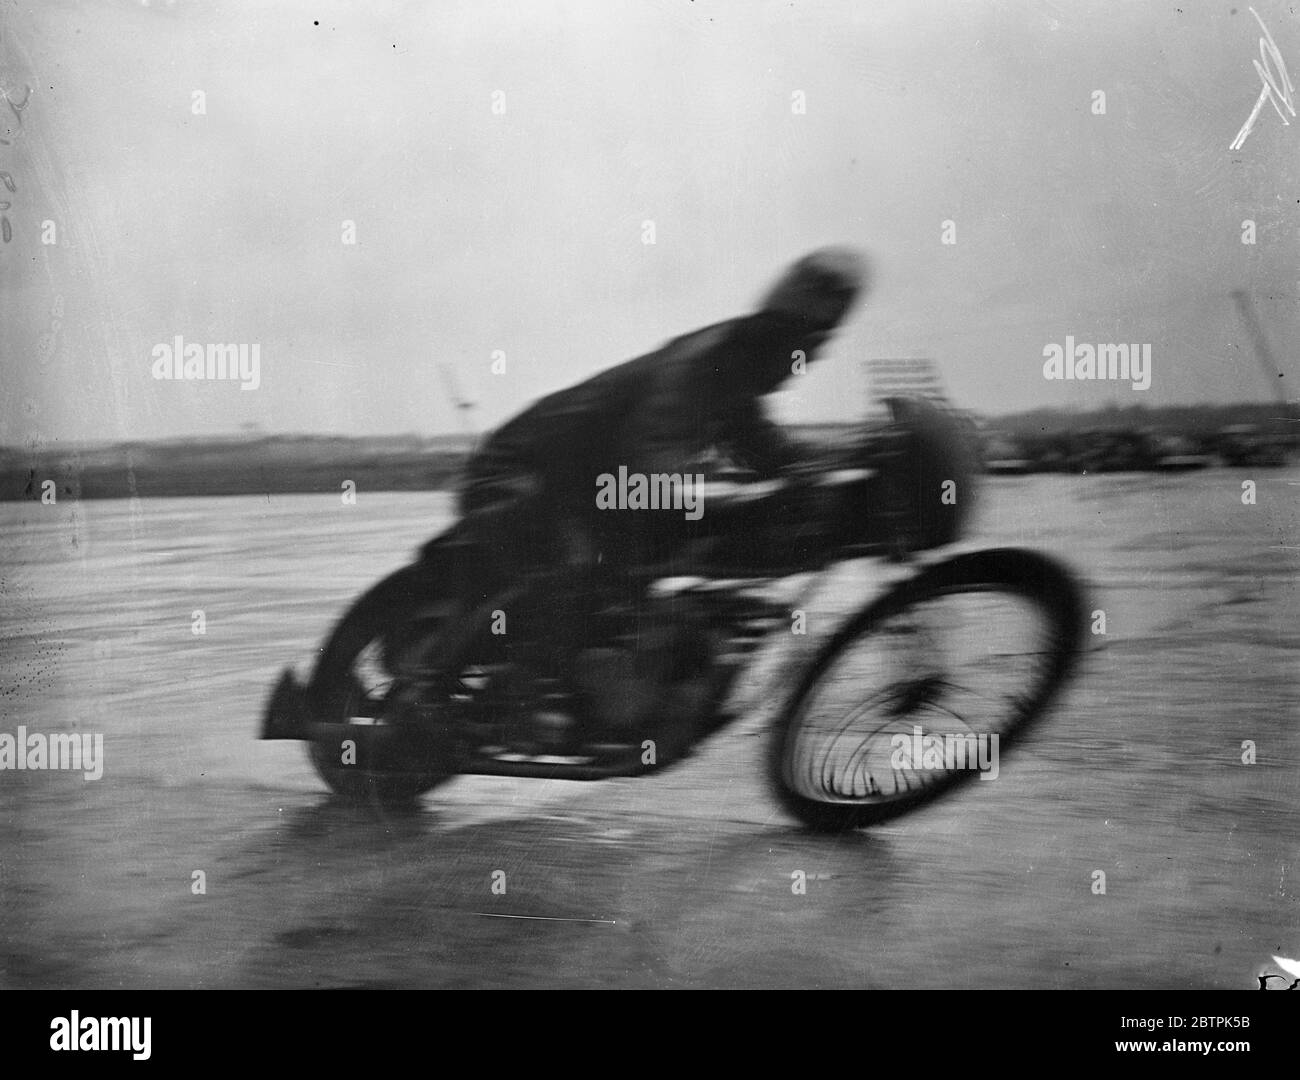 Ghost rider . Motor cycle racing season opens at Brooklands . The British Motor cycle racing club ' s first meeting opened the motor cycle racing season at Brooklands . Photo shows , an impression of speed as C B Bickell , riding an Ariel won the one lap Outer Circuit Handicap race at an average speed of 90 . 35 . 1 April 1936 Stock Photo